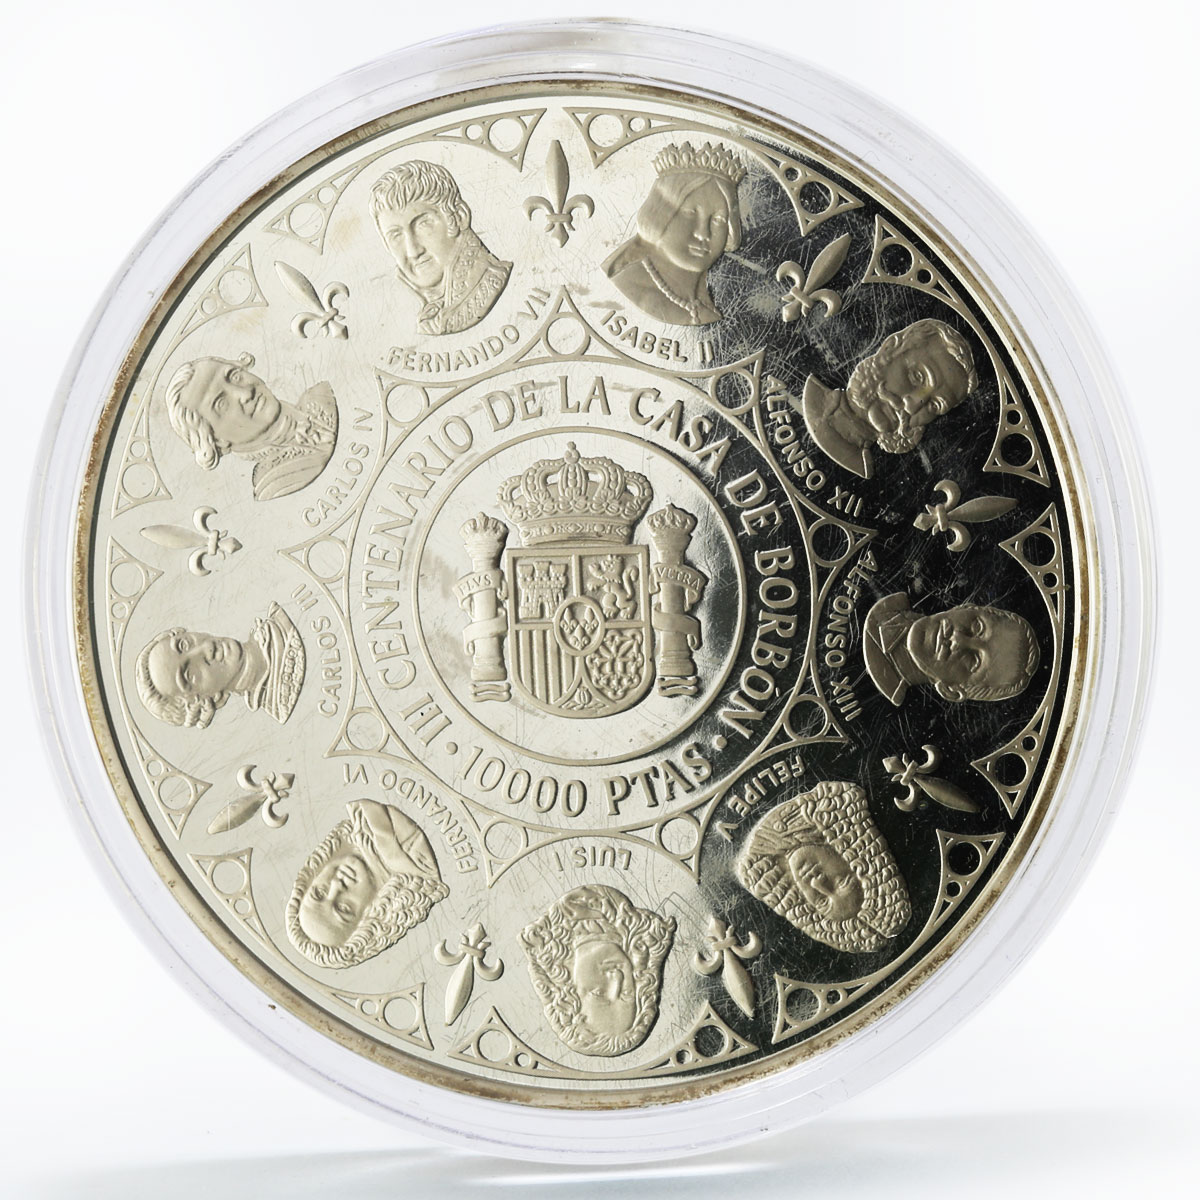 Spain 10000 pesetas 300th Anniversary of Bourbon Family proof silver coin 1999